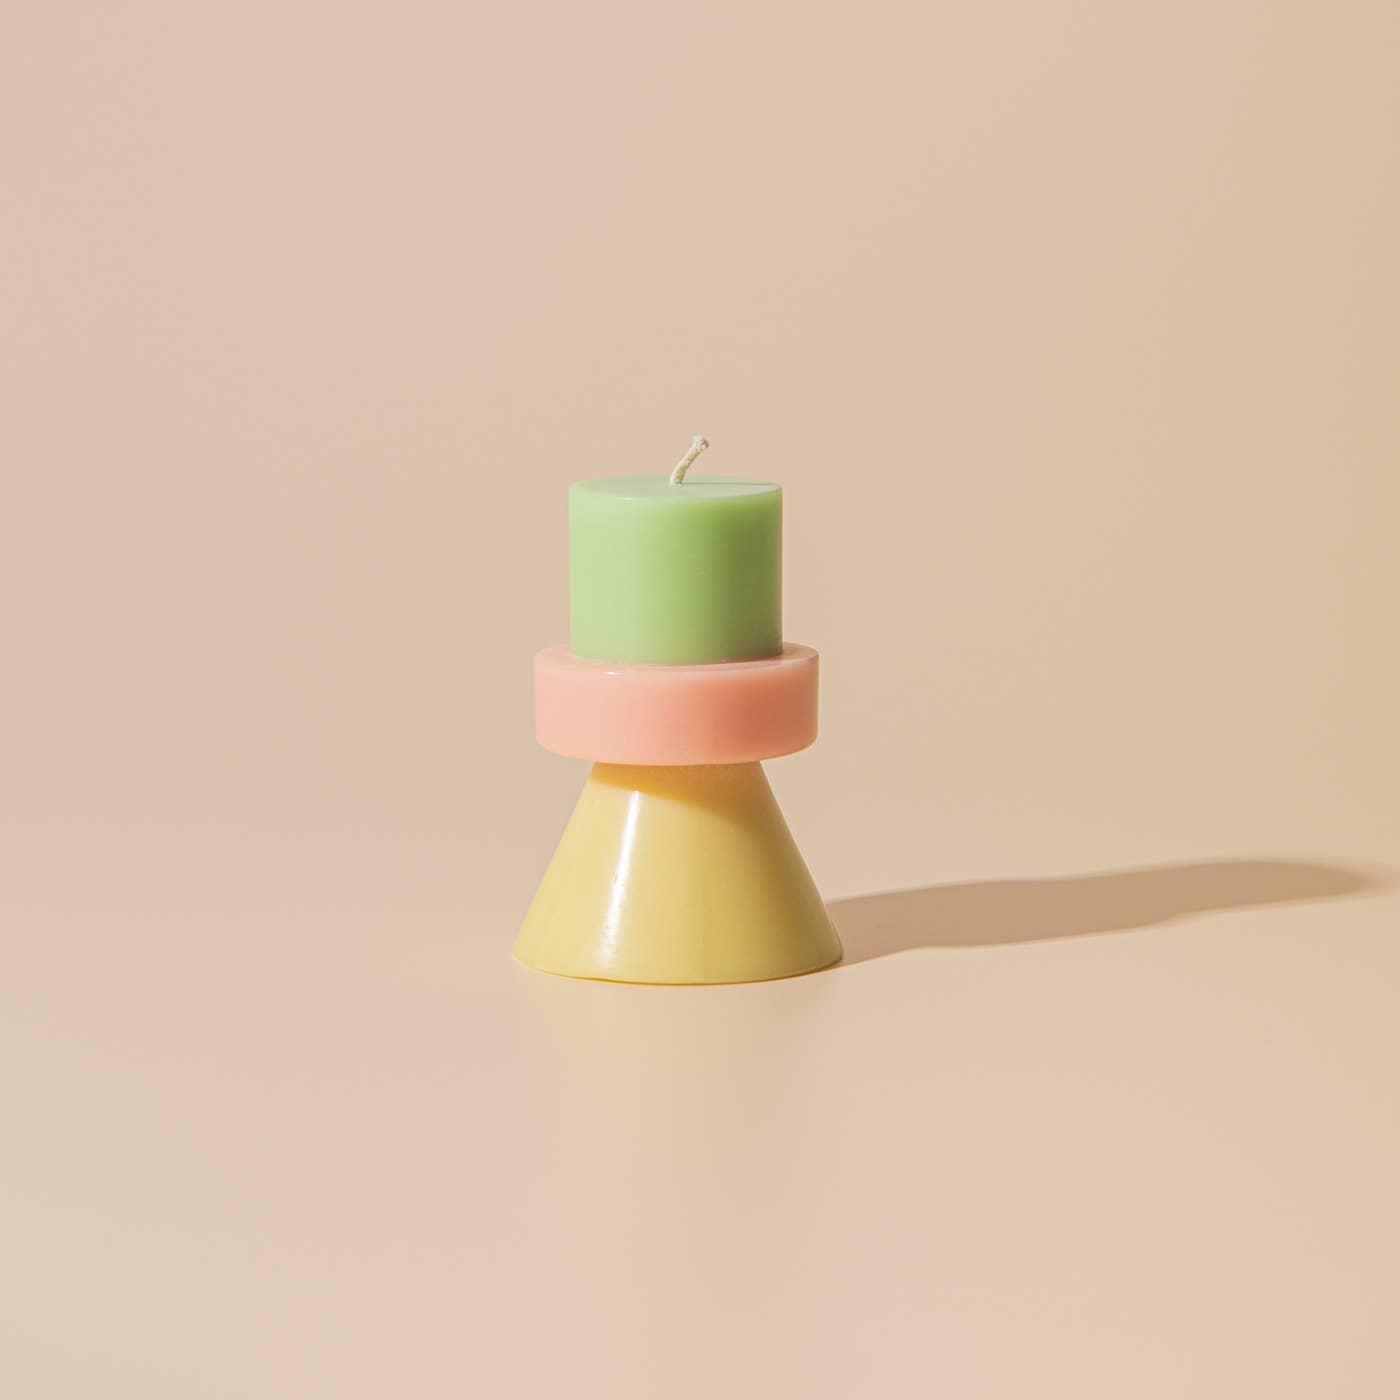 STACK CANDLE MINI - LIME GREEN / CORAL / YELLOW